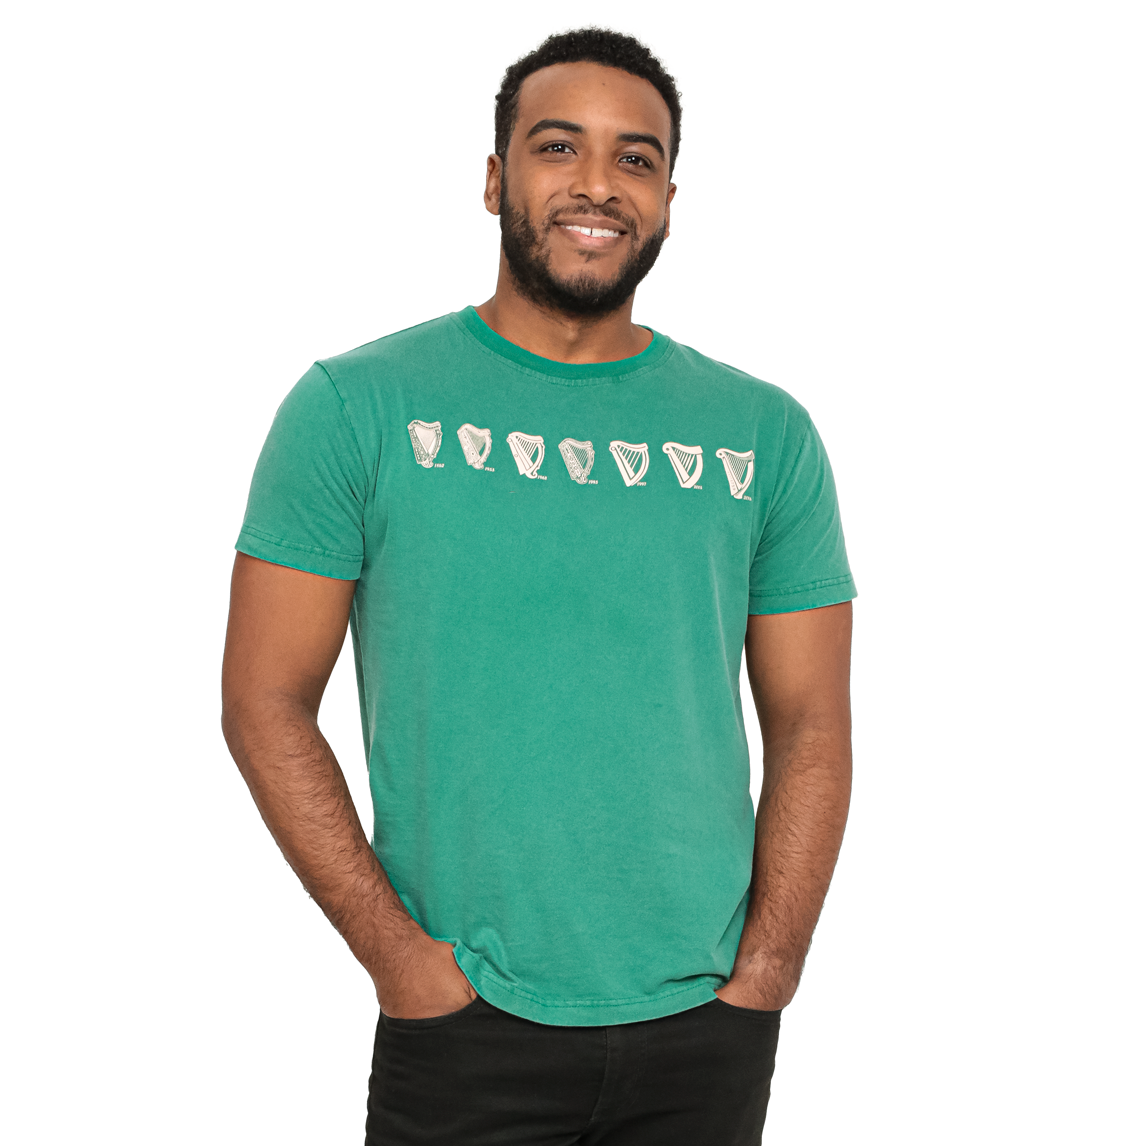 A man is smiling while wearing a green Evolution Harp Guinness T-Shirt.